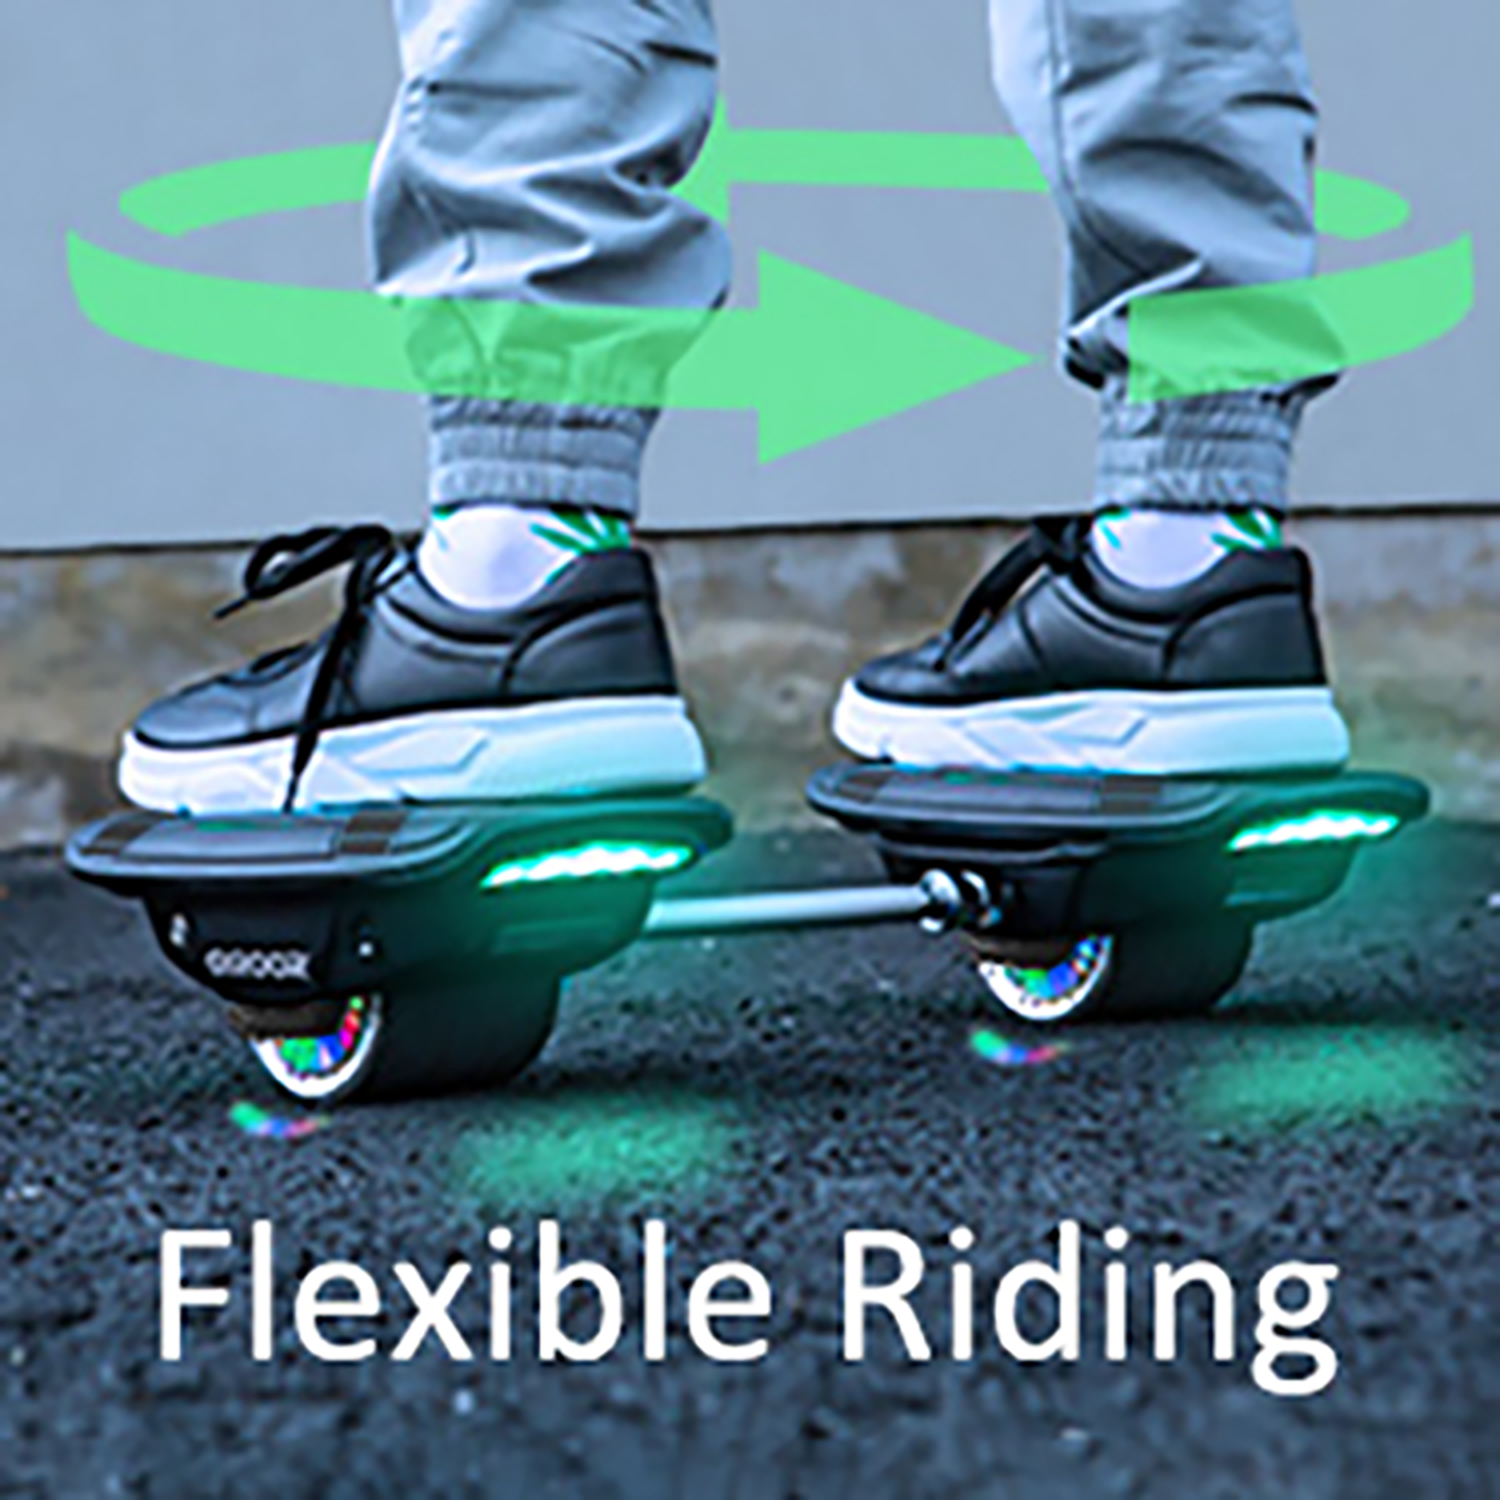 Magic Hover HS300 One Wheel Hoverboard Gyroshoes Electric Roller Skate, Self-Balancing Hover shoes with LED Light for Kids and Adults - image 3 of 9